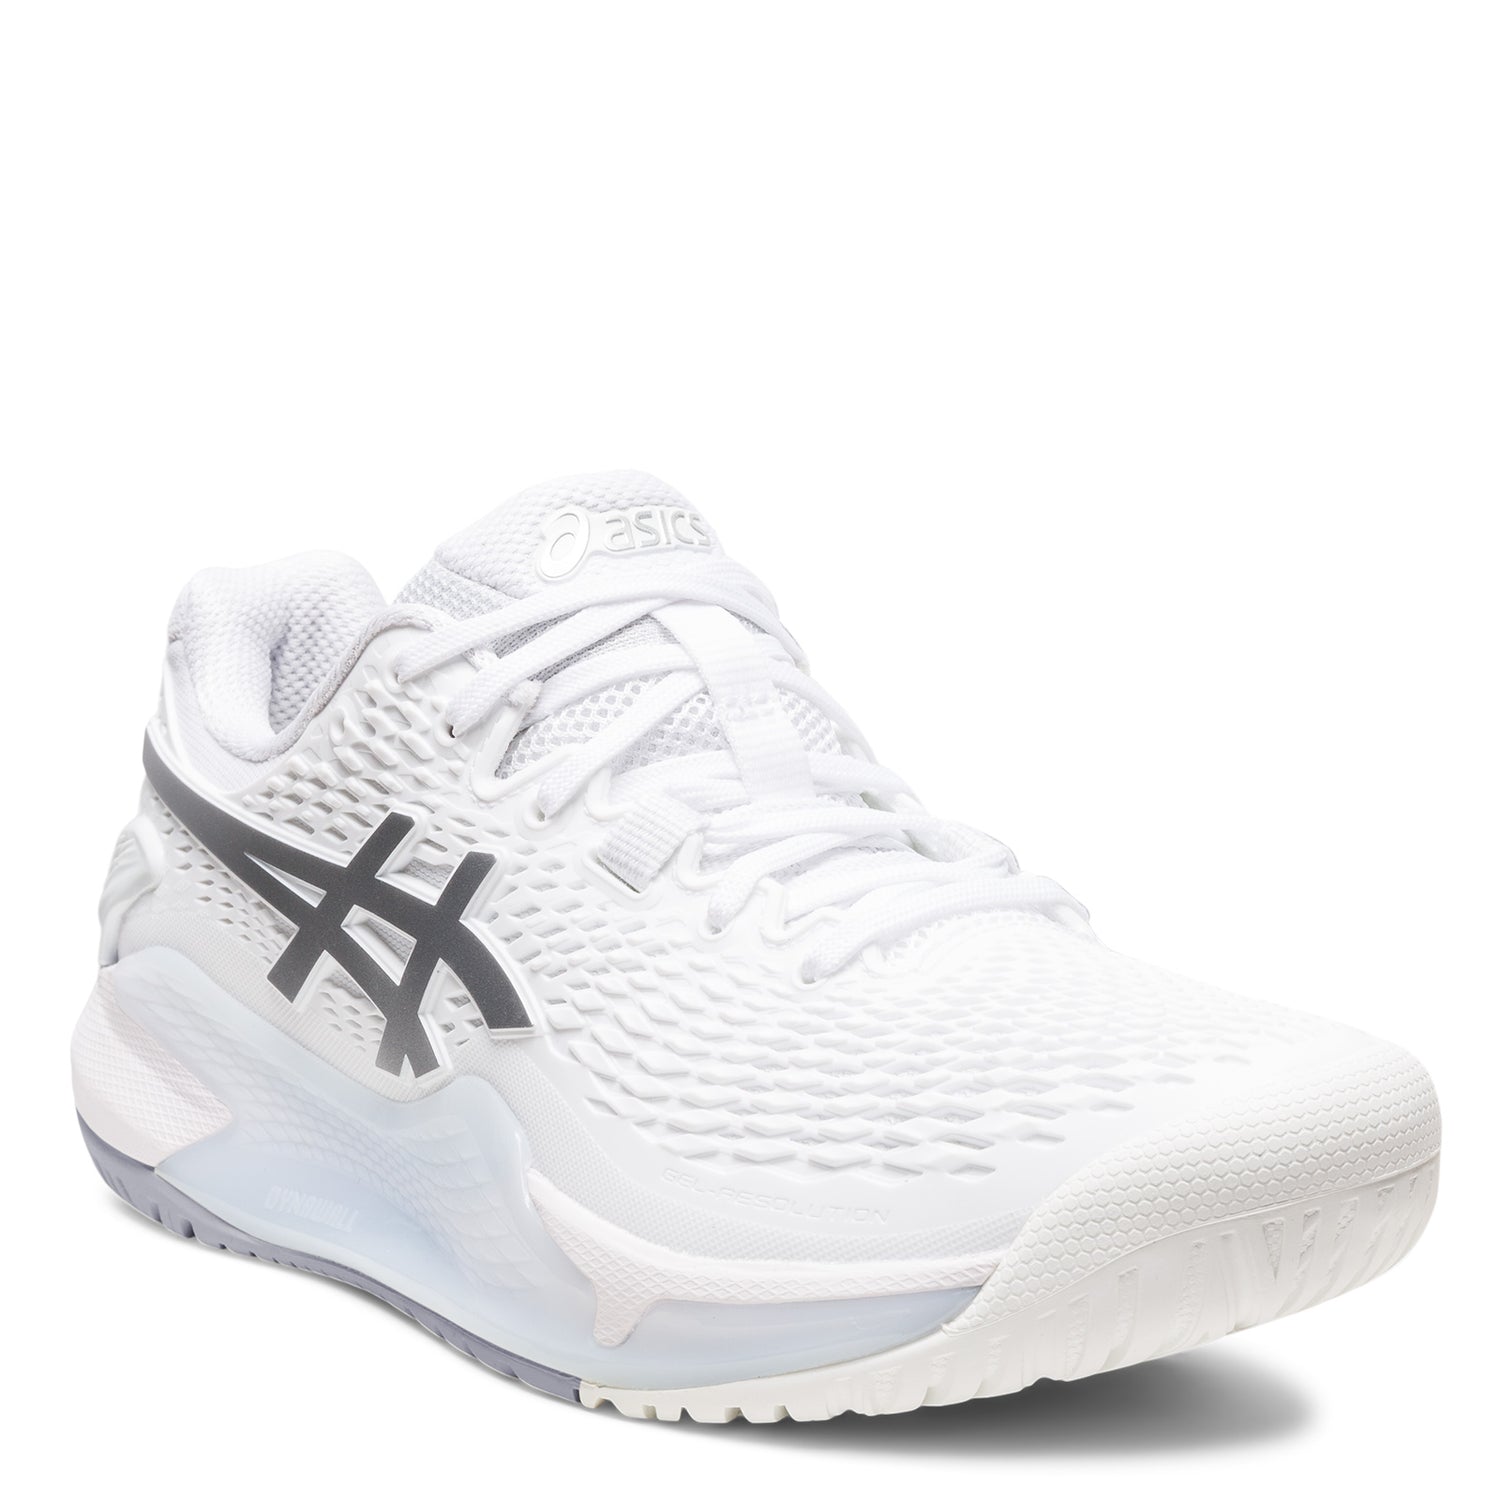 Asics Gel Resolution 9 AC White/Silver Women's Shoes